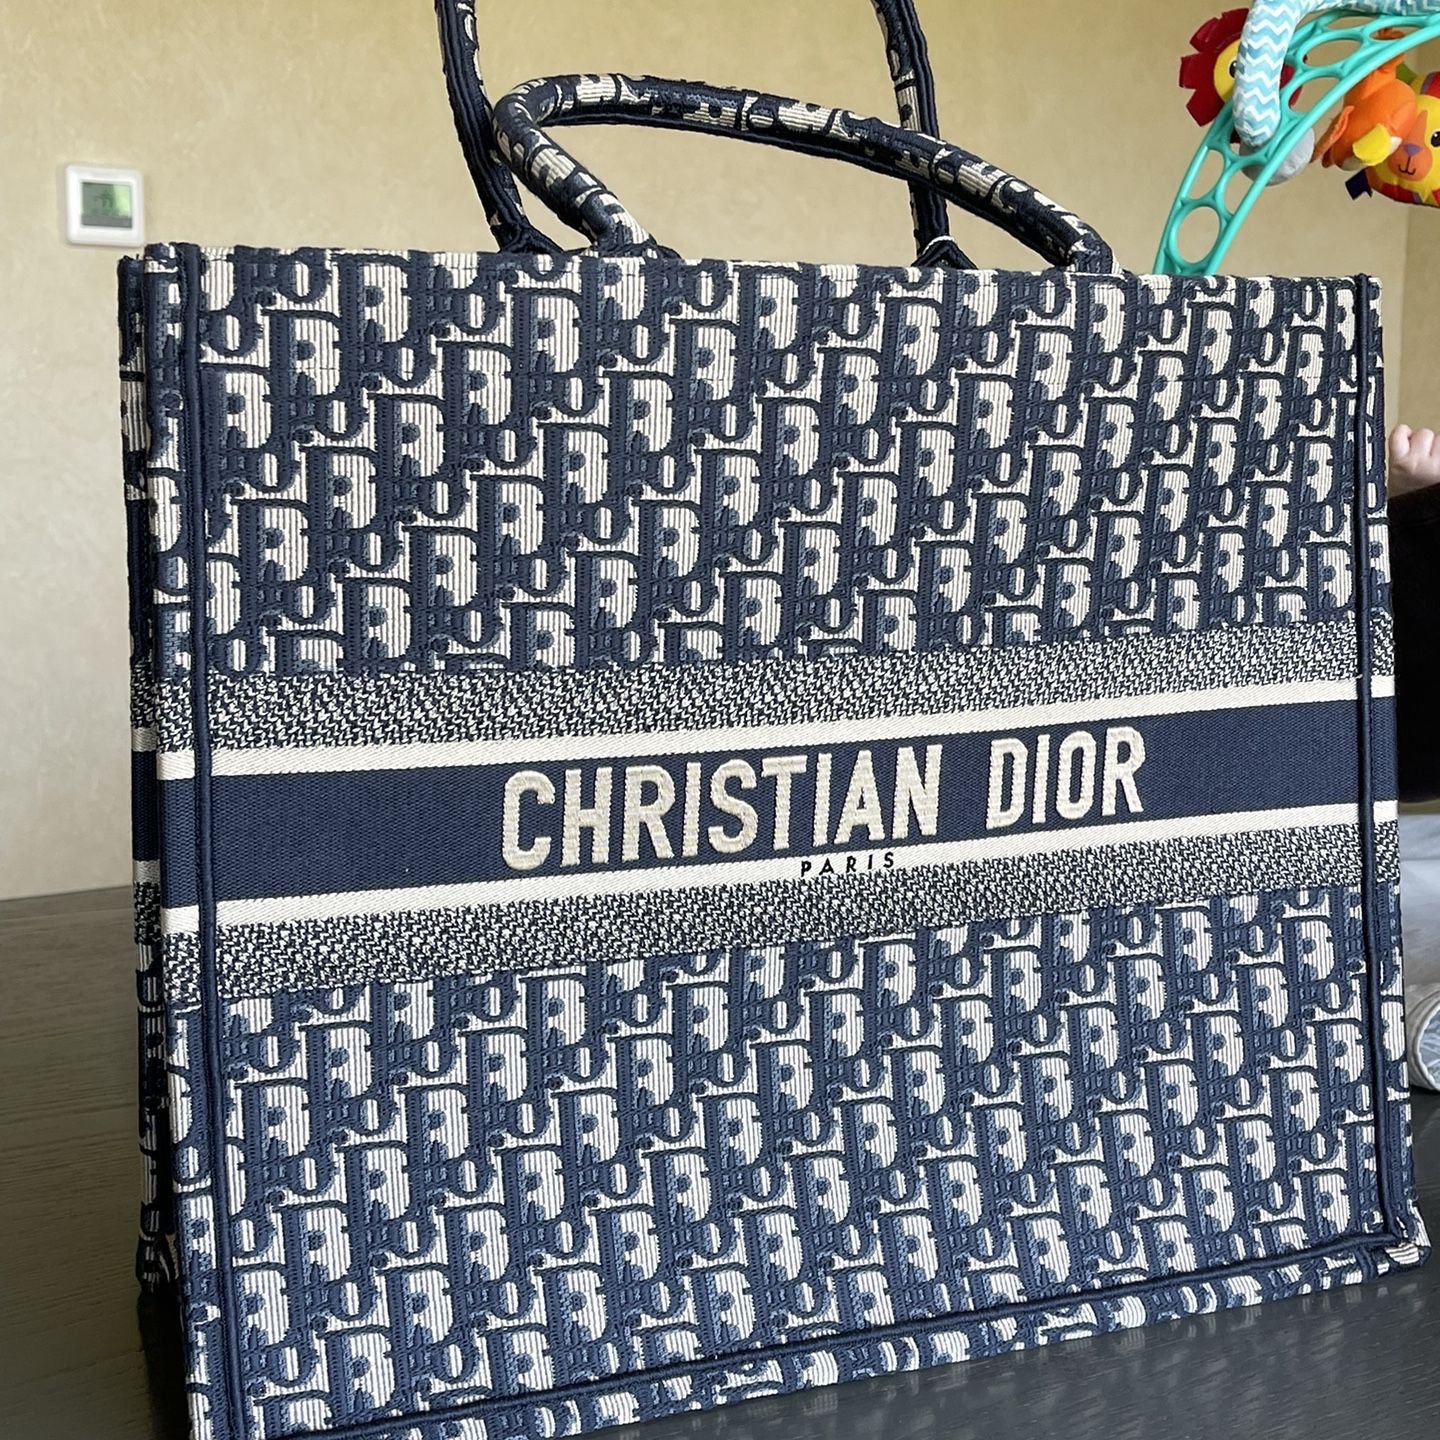 Chloe Woody Linen Tote Bag Medium Logo Straps Brown Leather Canvas Gray  Neutral Dior Louis Vuitton for Sale in Aurora, CO - OfferUp